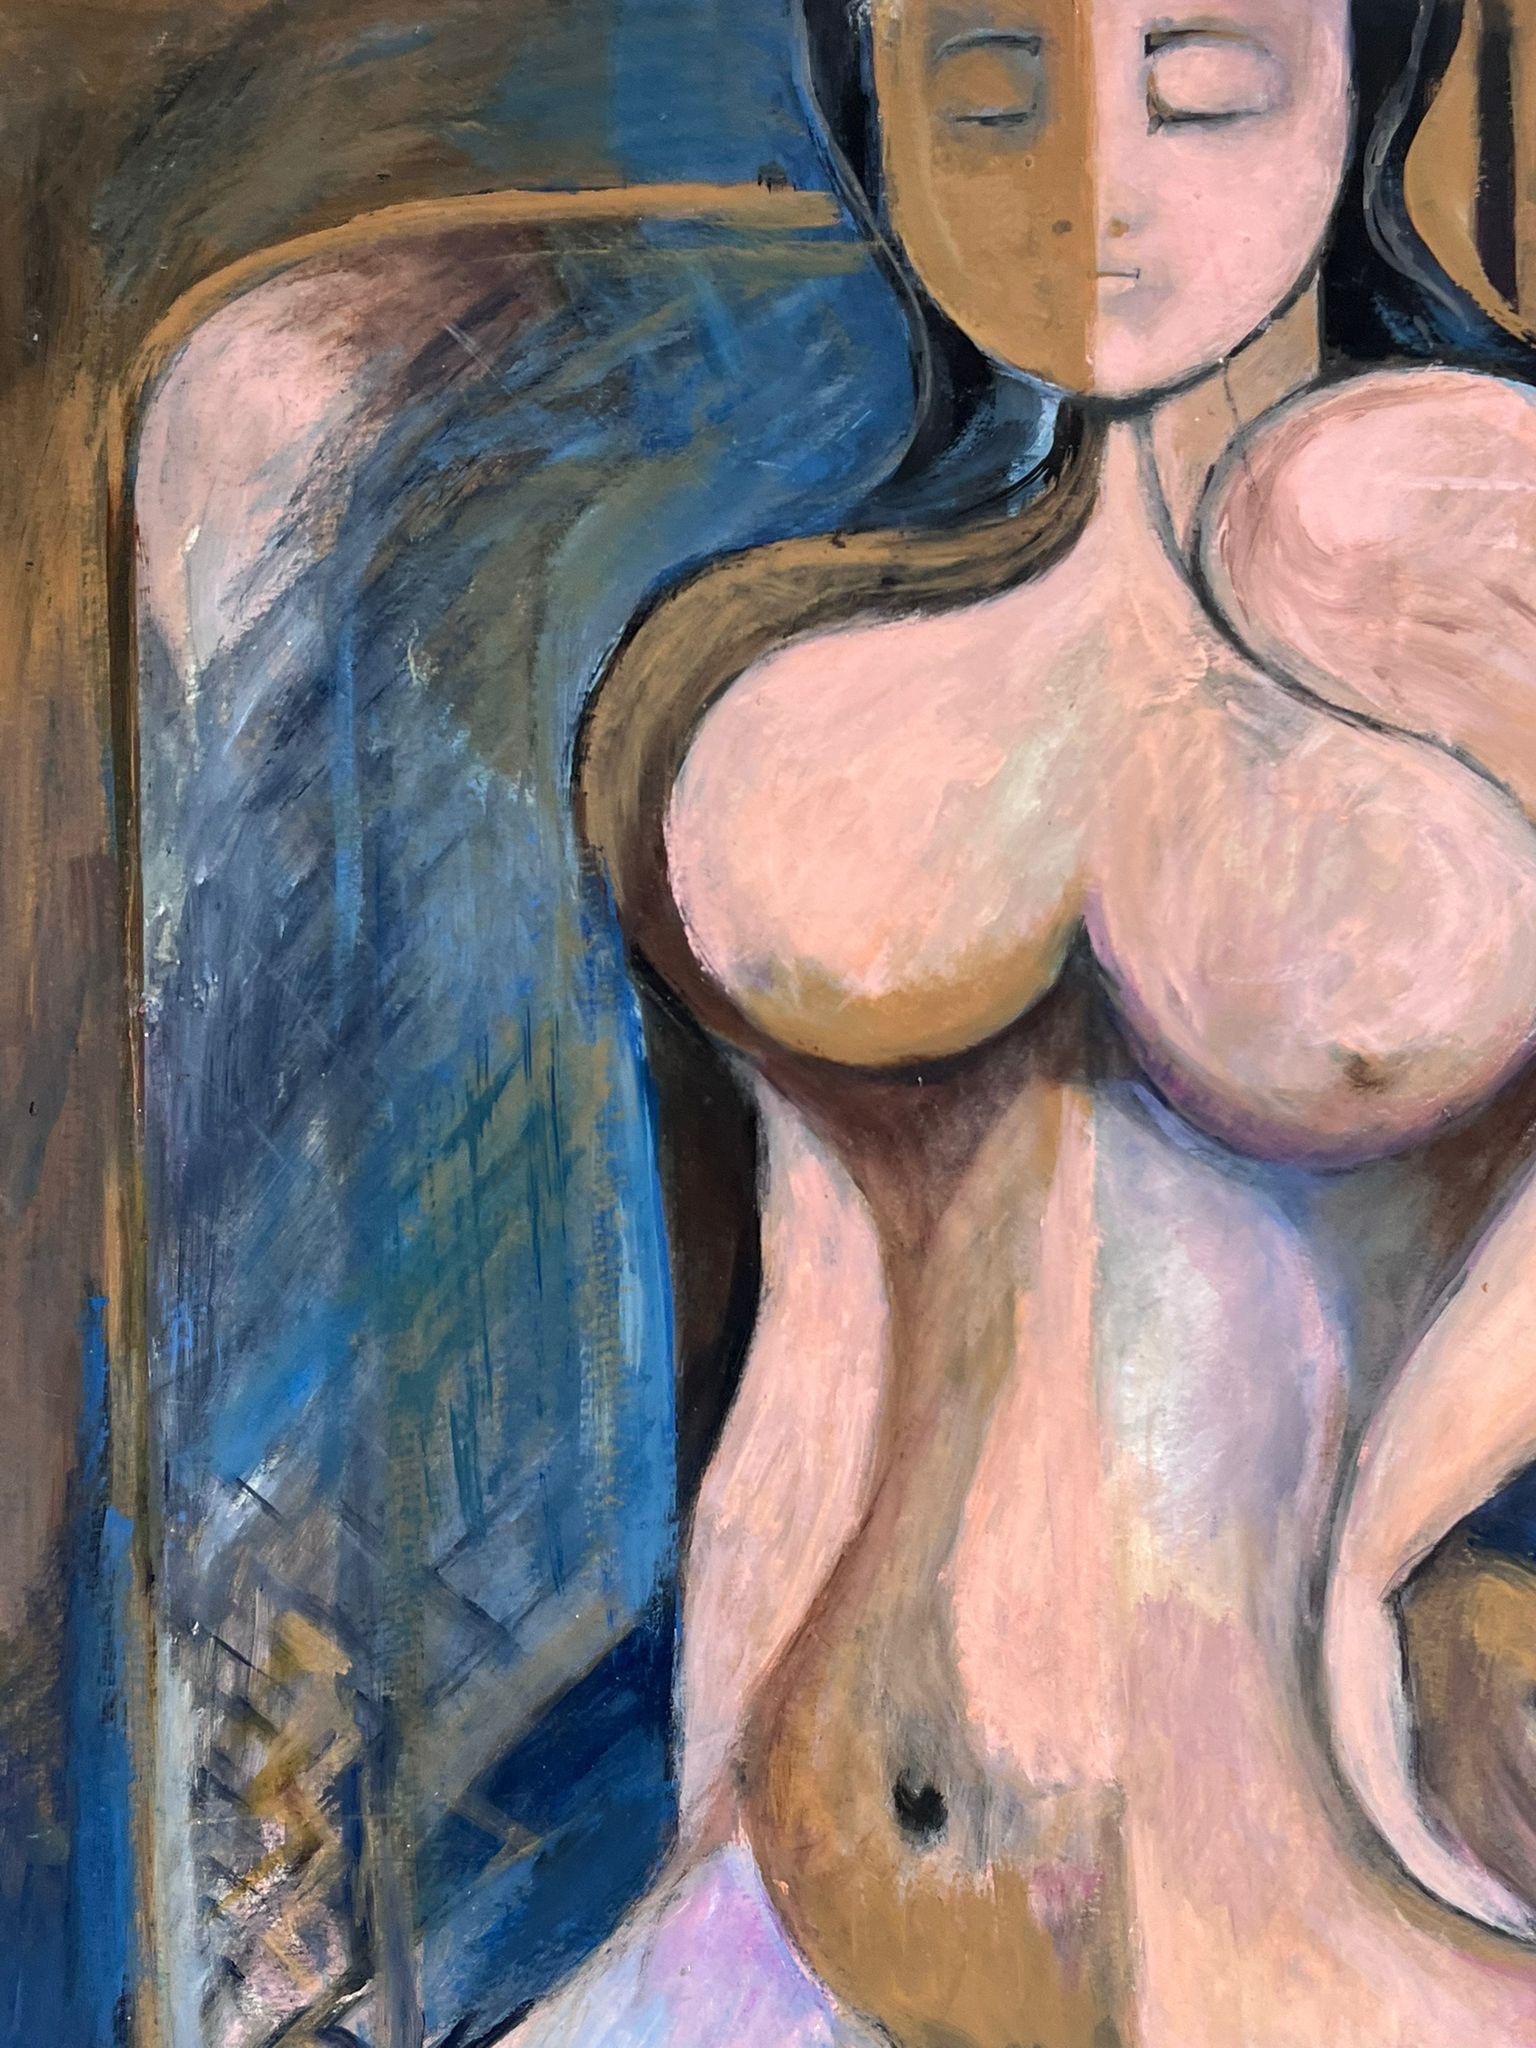 Nude Model
by Helene Dadone (French cubist artist, 20th century)
signed with initials 
oil on board, unframed
board: 29.5 x 21.5 inches
provenance: private collection, France
condition: very good and sound condition